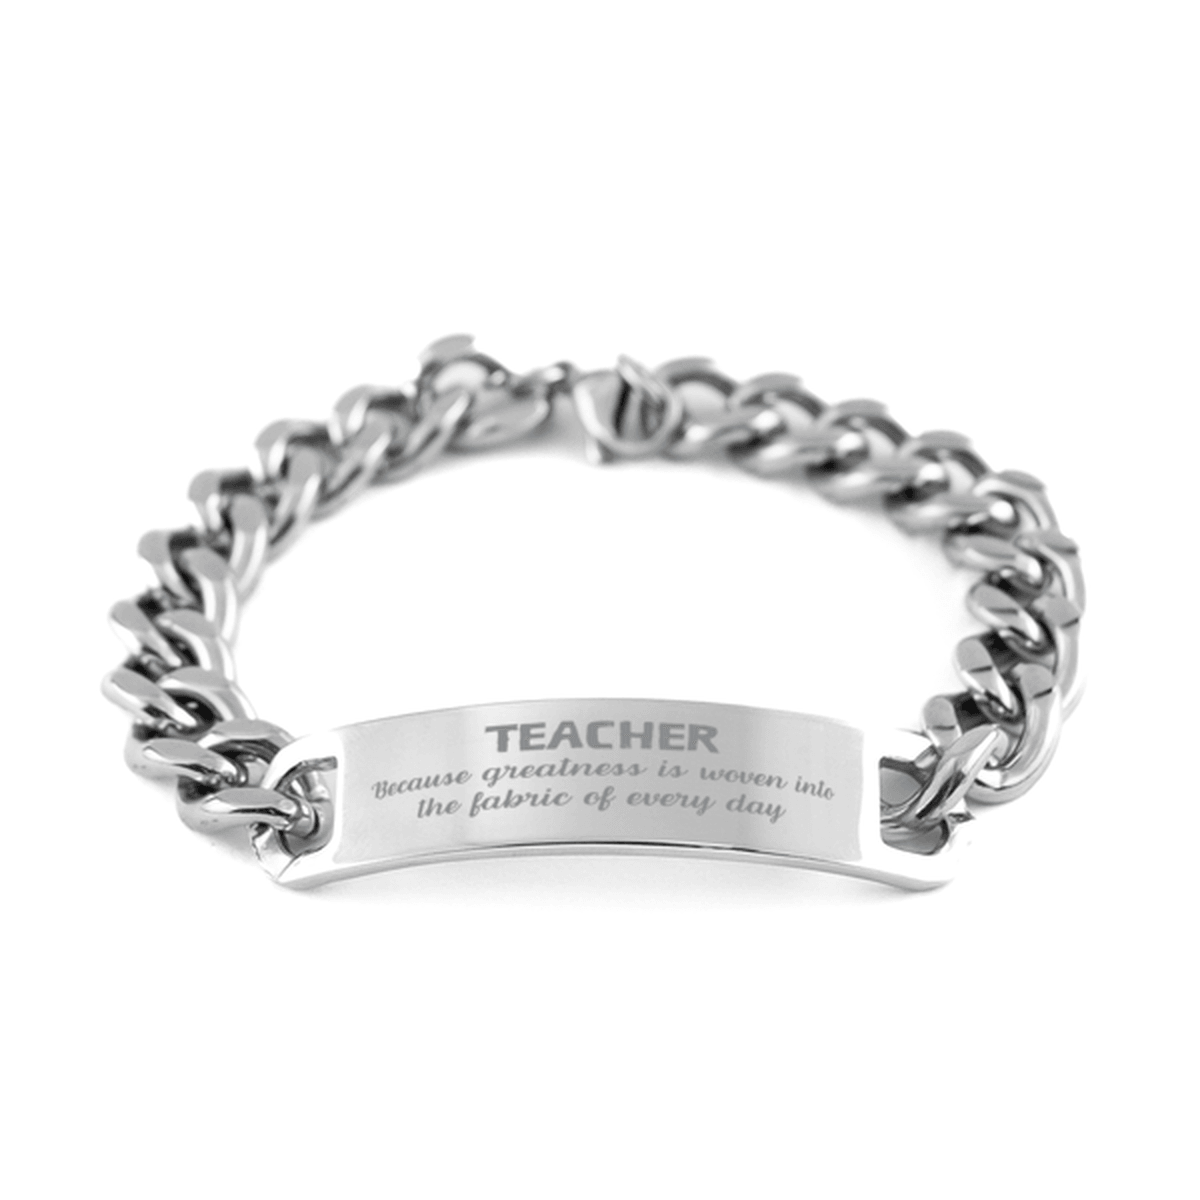 Sarcastic Teacher Cuban Chain Stainless Steel Bracelet Gifts, Christmas Holiday Gifts for Teacher Birthday, Teacher: Because greatness is woven into the fabric of every day, Coworkers, Friends - Mallard Moon Gift Shop